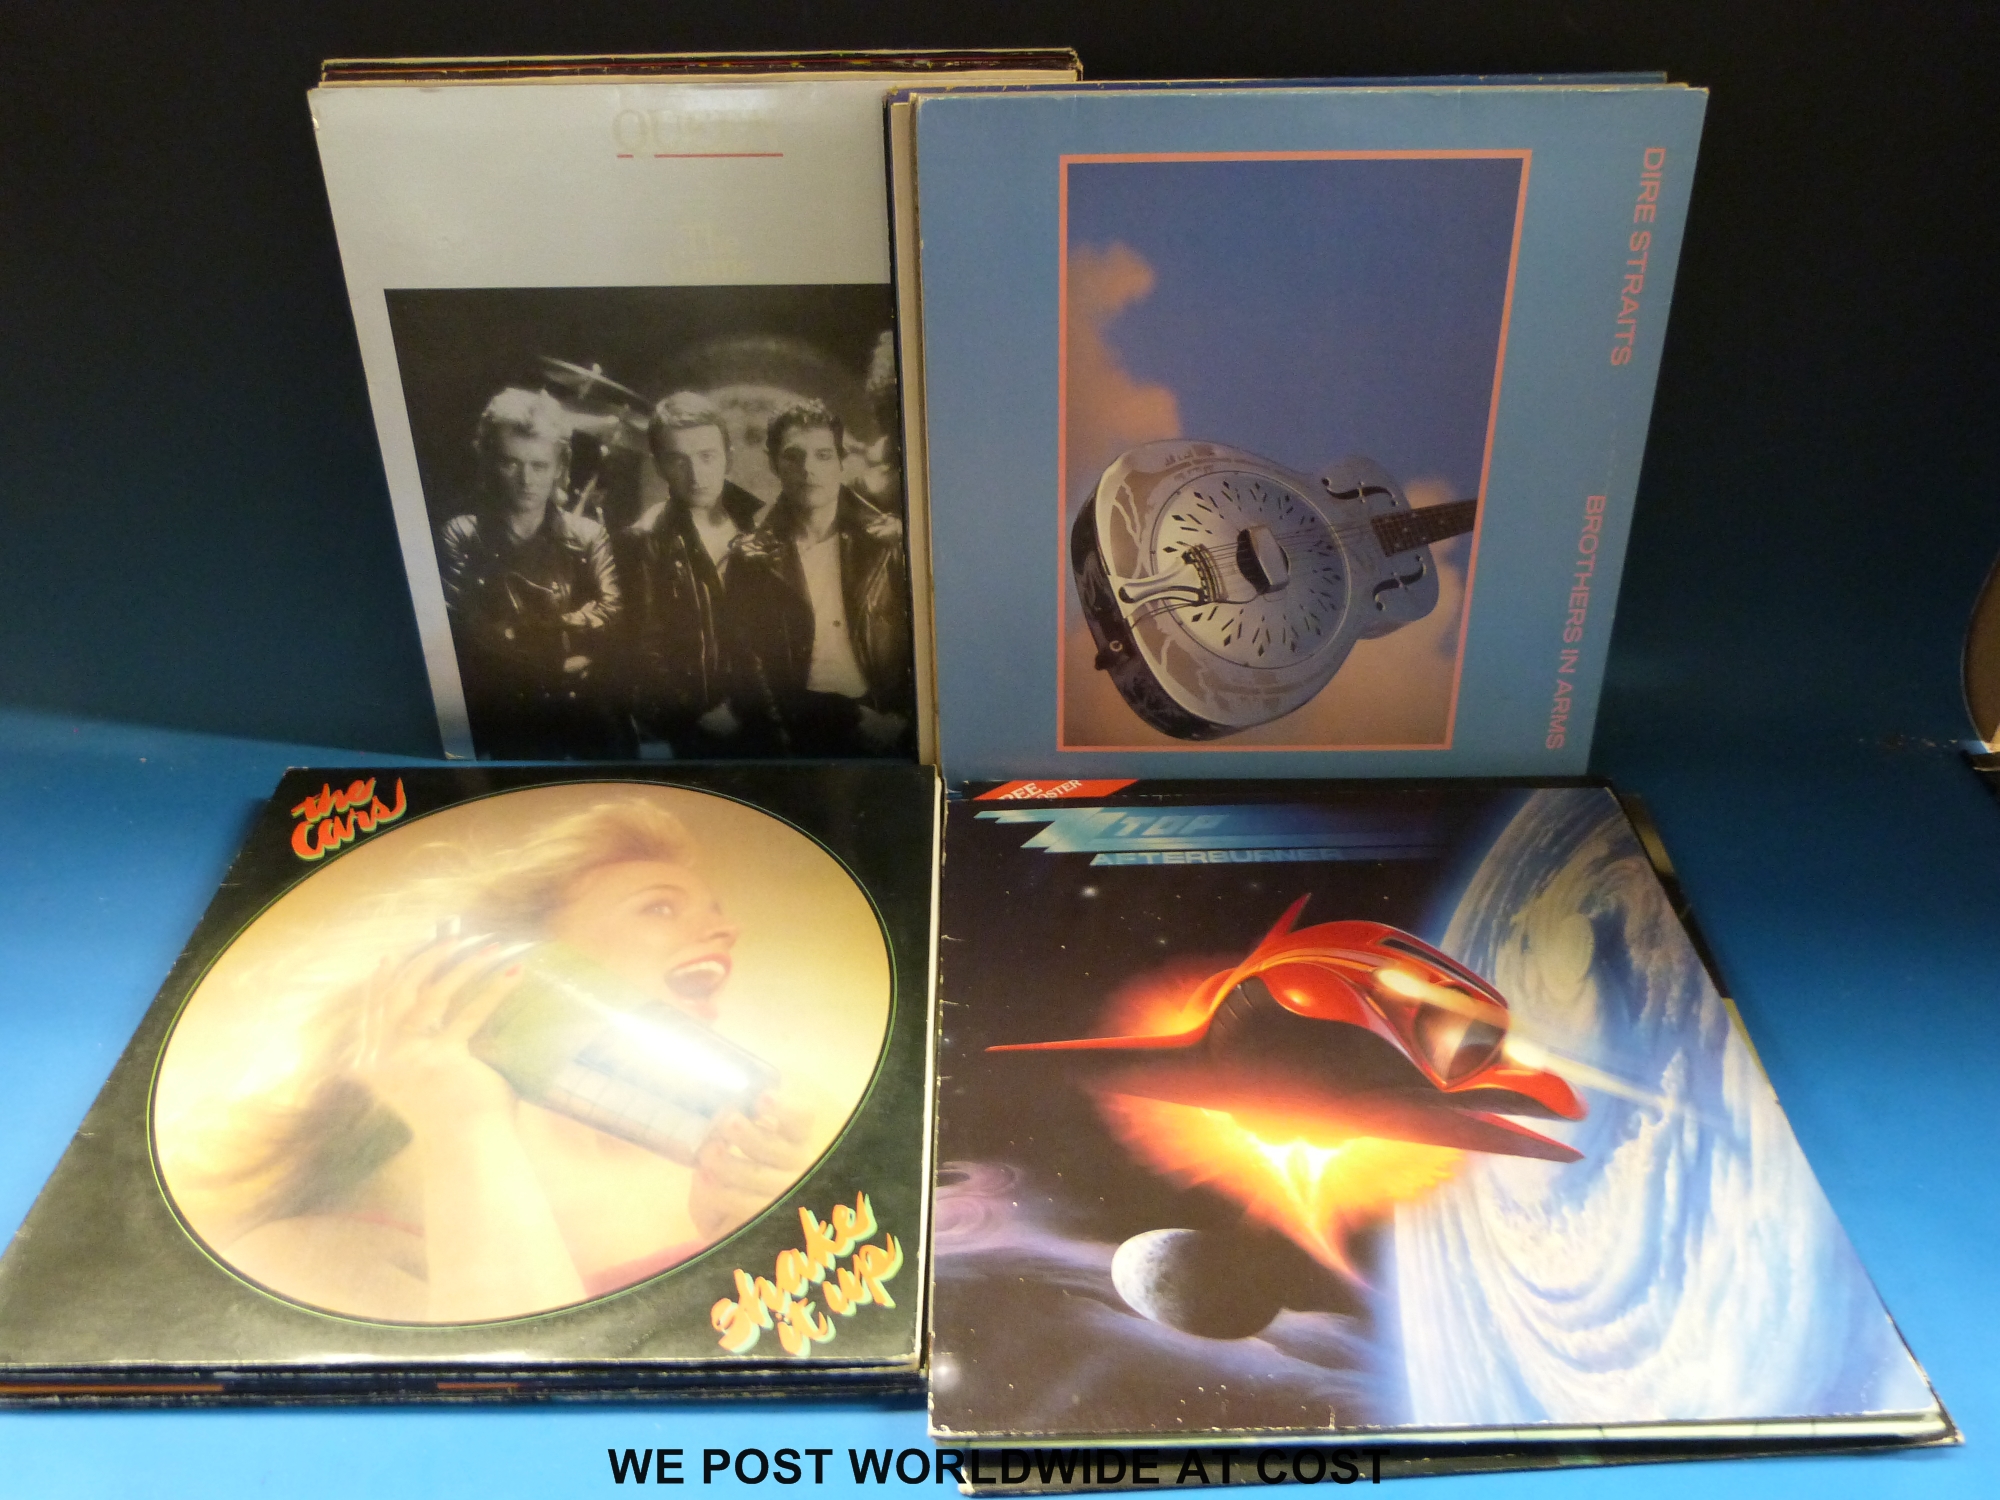 Over 35x LPs from the 1970s and 1980s including artists such as Status Quo, Genesis, ELO, - Image 2 of 3